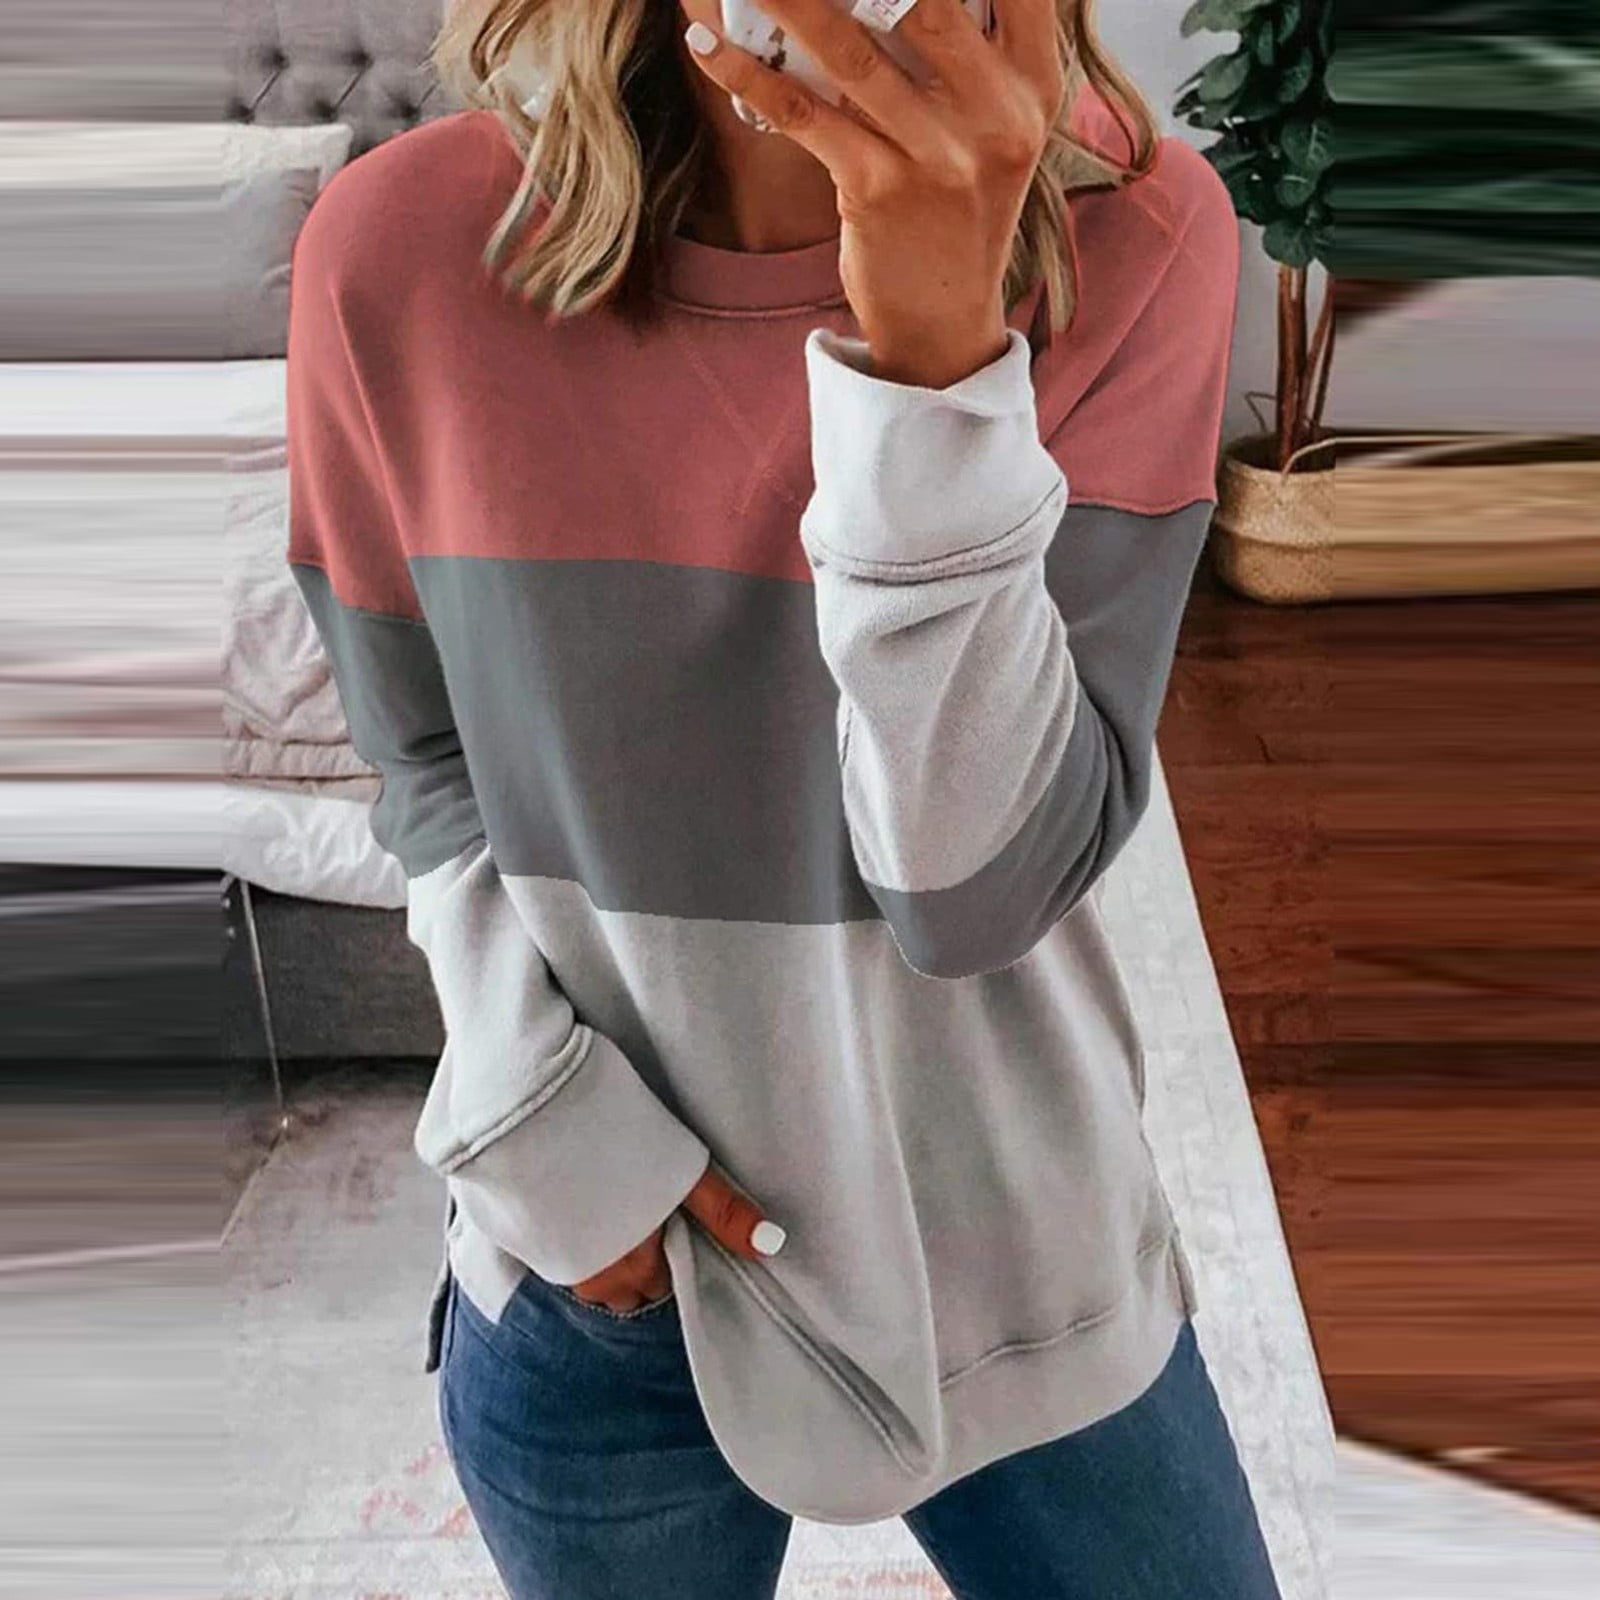 MOLayys Womens Going out Tops,Women's Long Sleeve Sweatshirts Trendy Solid  Crewneck Casual Shirts Loose Fit Pullover Tops